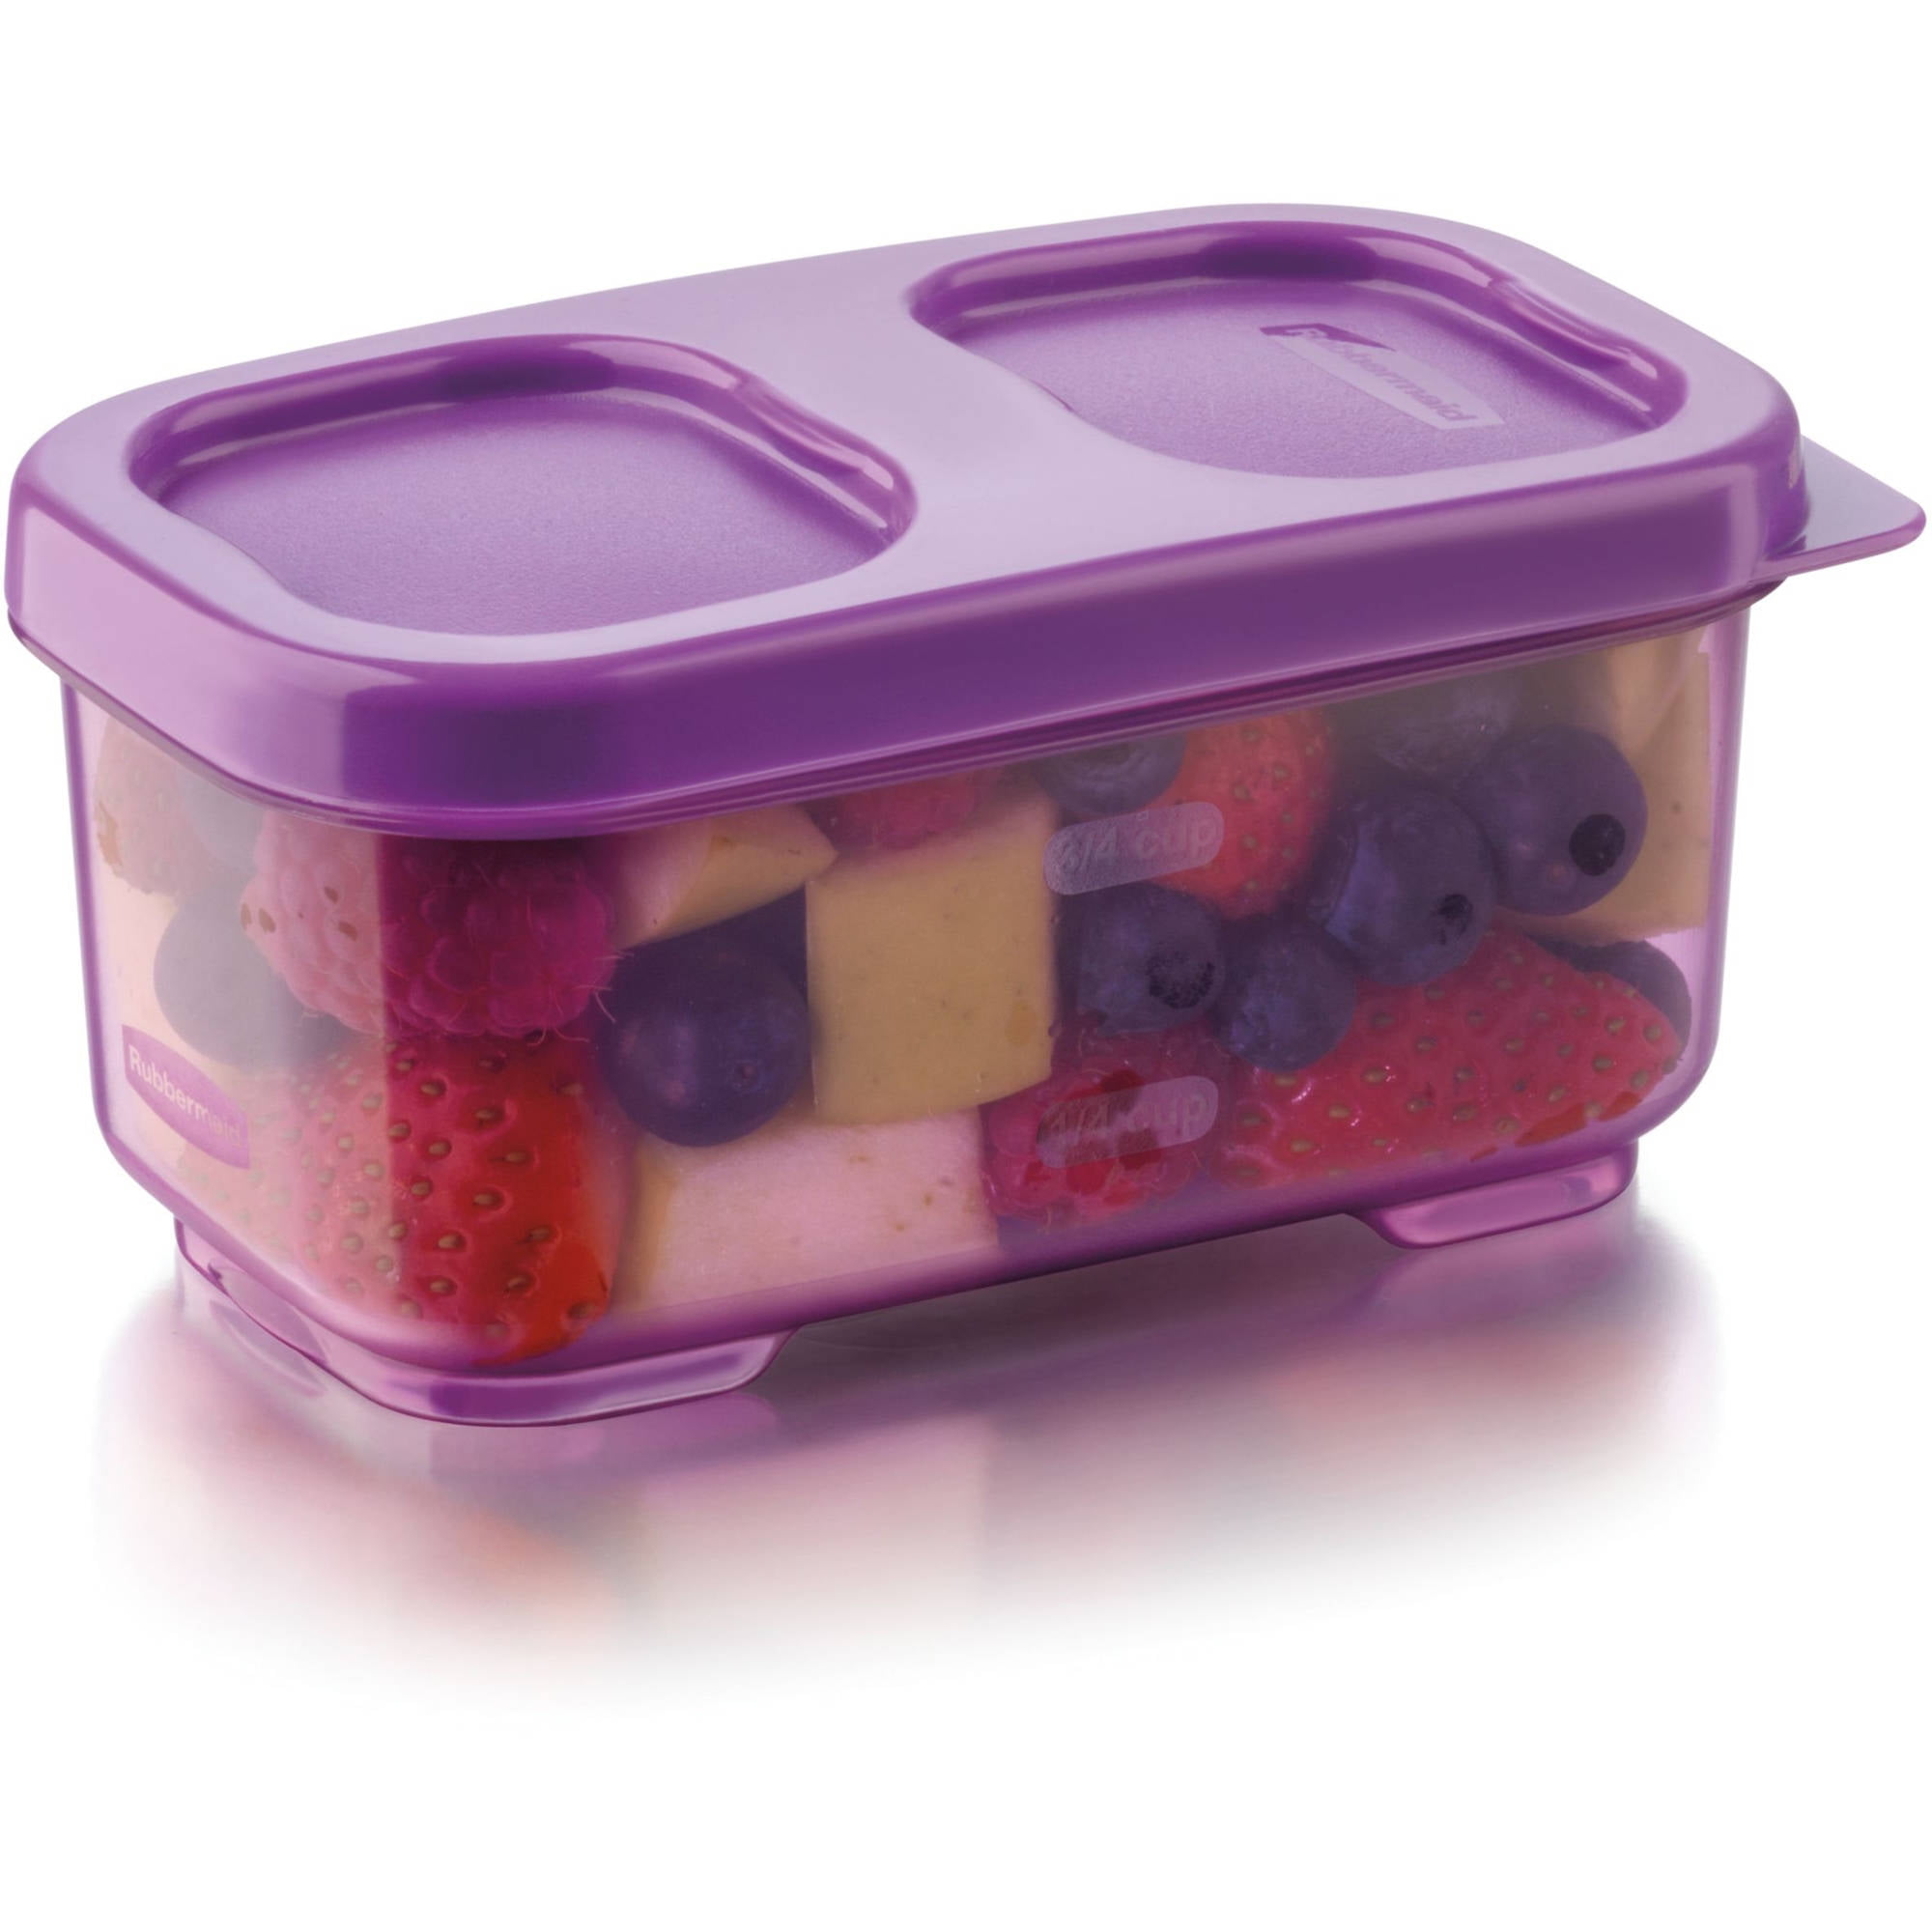 Rubbermaid LunchBlox 7-Piece Modular Entree Food Containers with